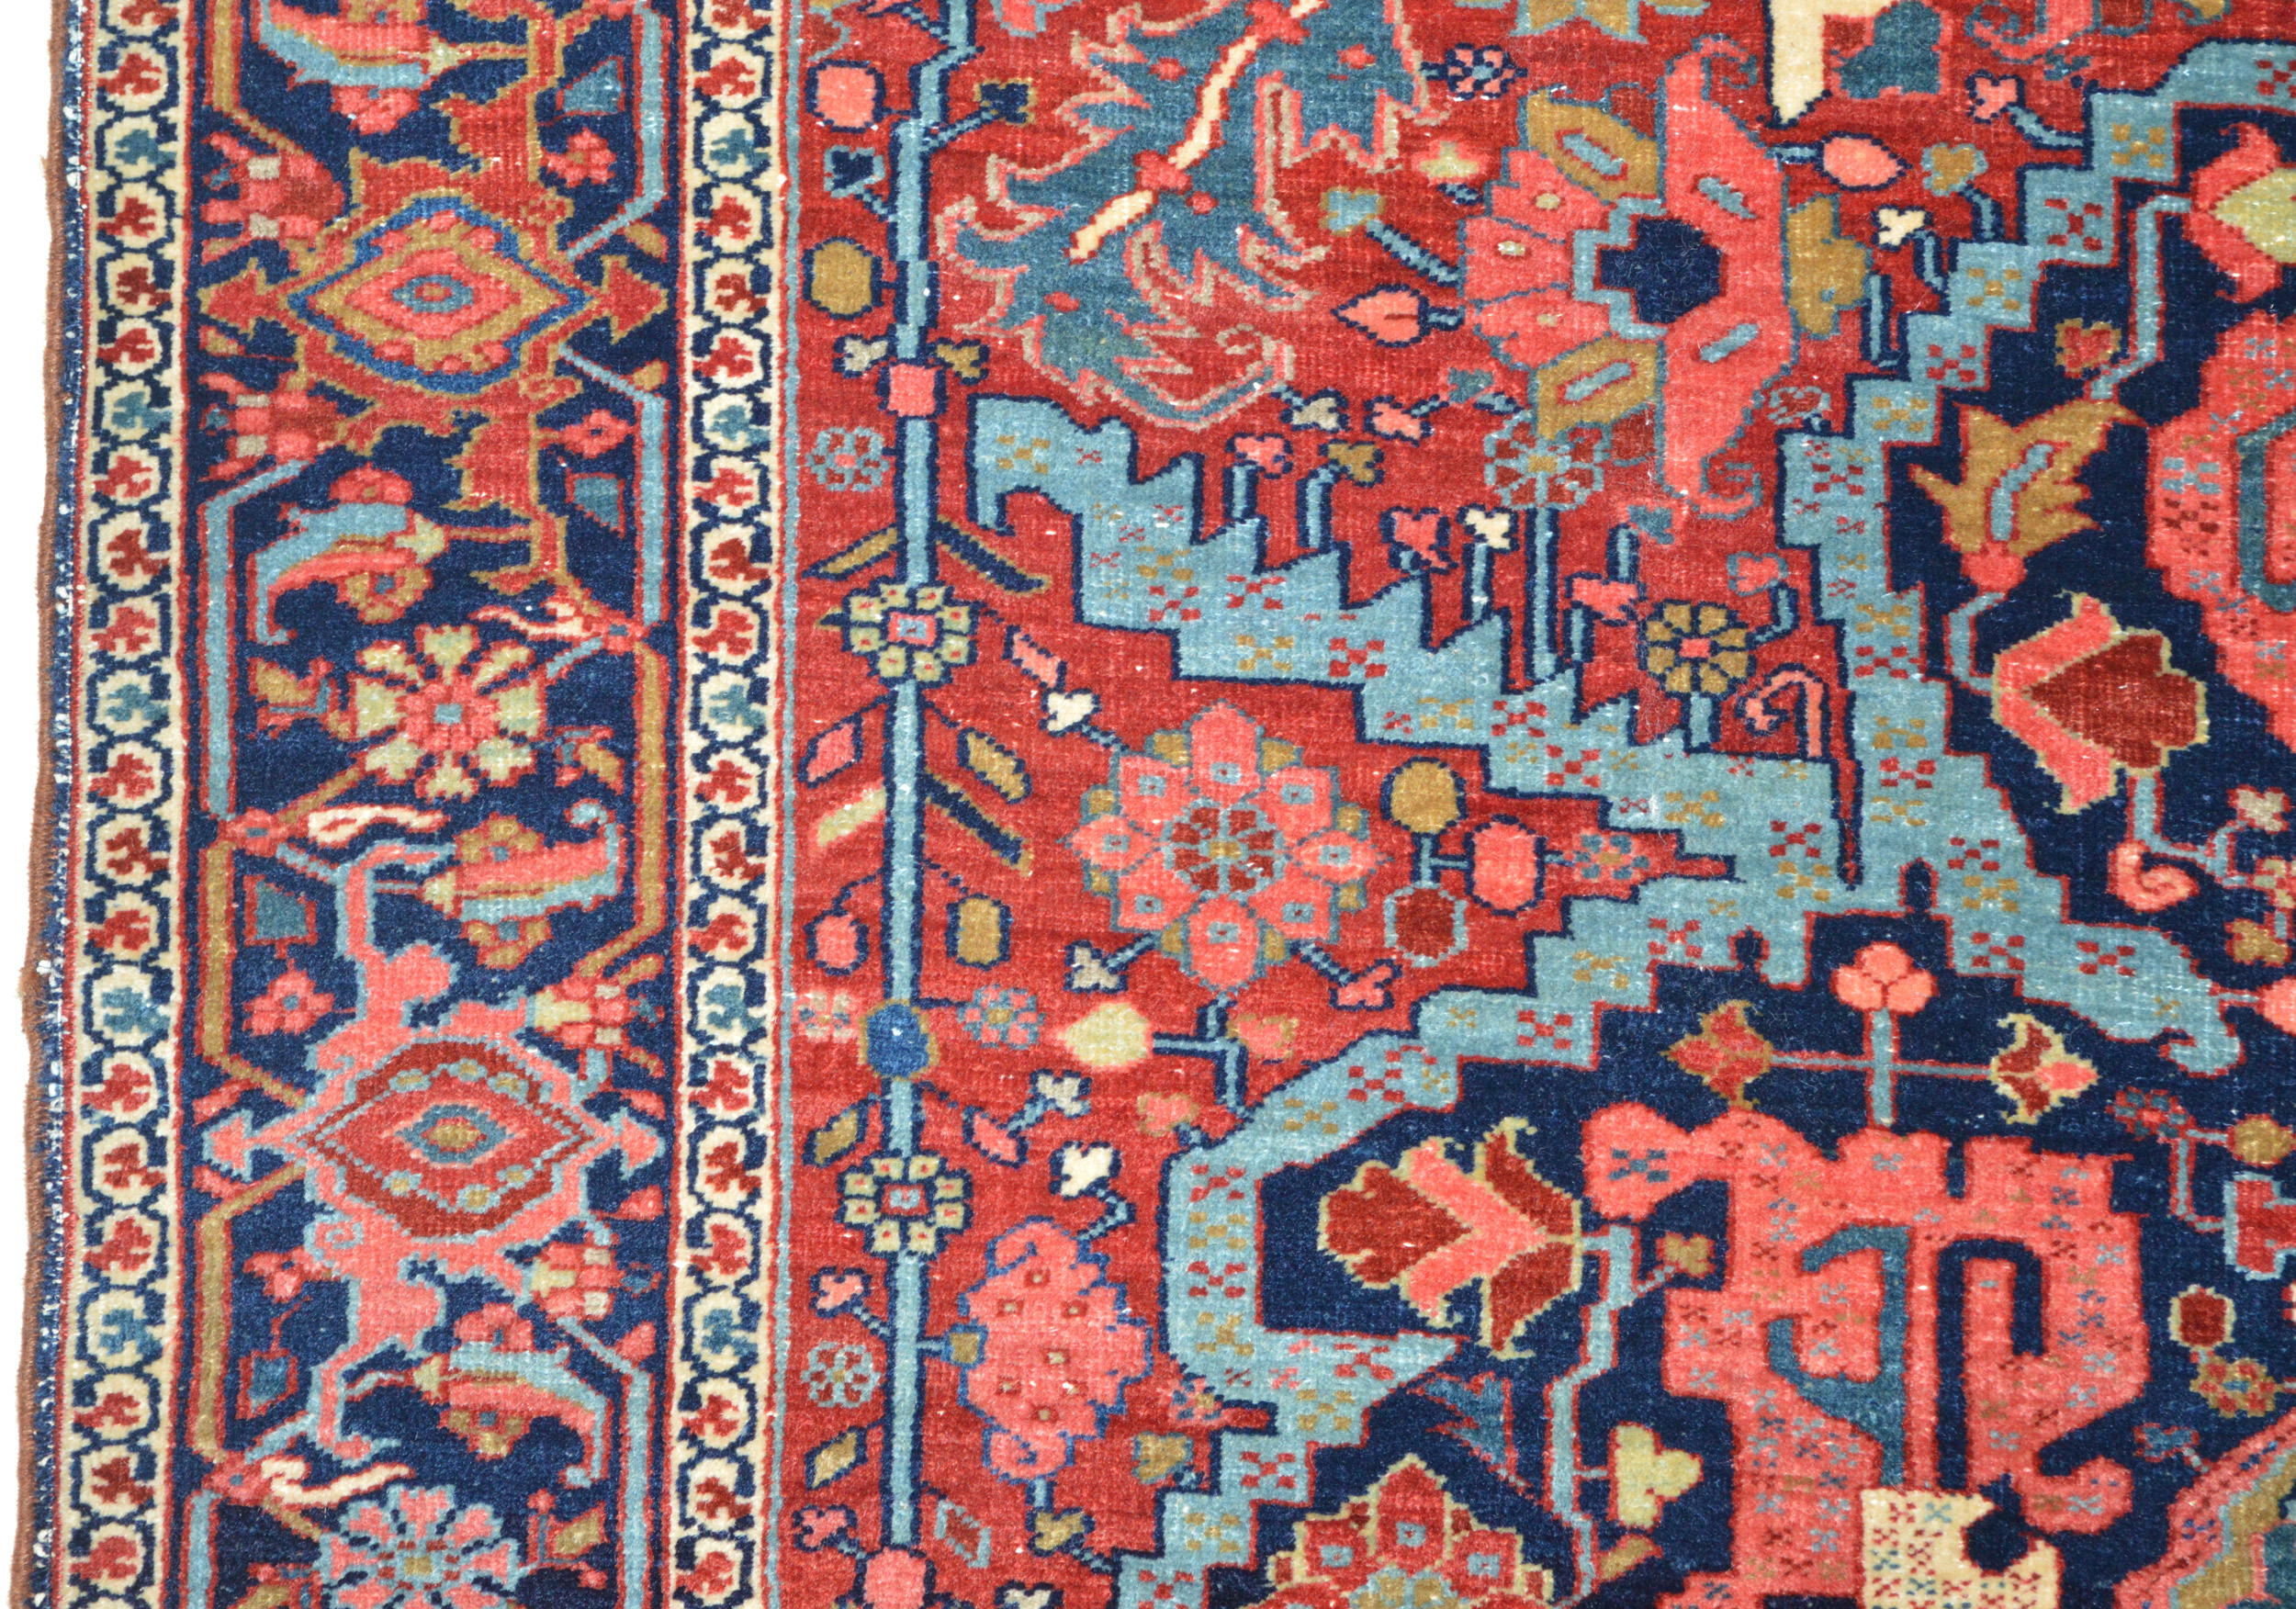 Field and border from a finely woven antique northwest Persian Heriz rug with a navy blue, Bakshaish style medallion on a red field framed by a navy blue Turtle design border, circa 1900. Douglas Stock Gallery offers a wide selection of high quality antique Persian Heriz, "Serapi", Karaja and Bakshaish rugs and room size carpets from the Heriz district in northwest Persia. Antique rugs Boston,MA area, antique rugs NYC by appointment, antique rugs DC by appointment